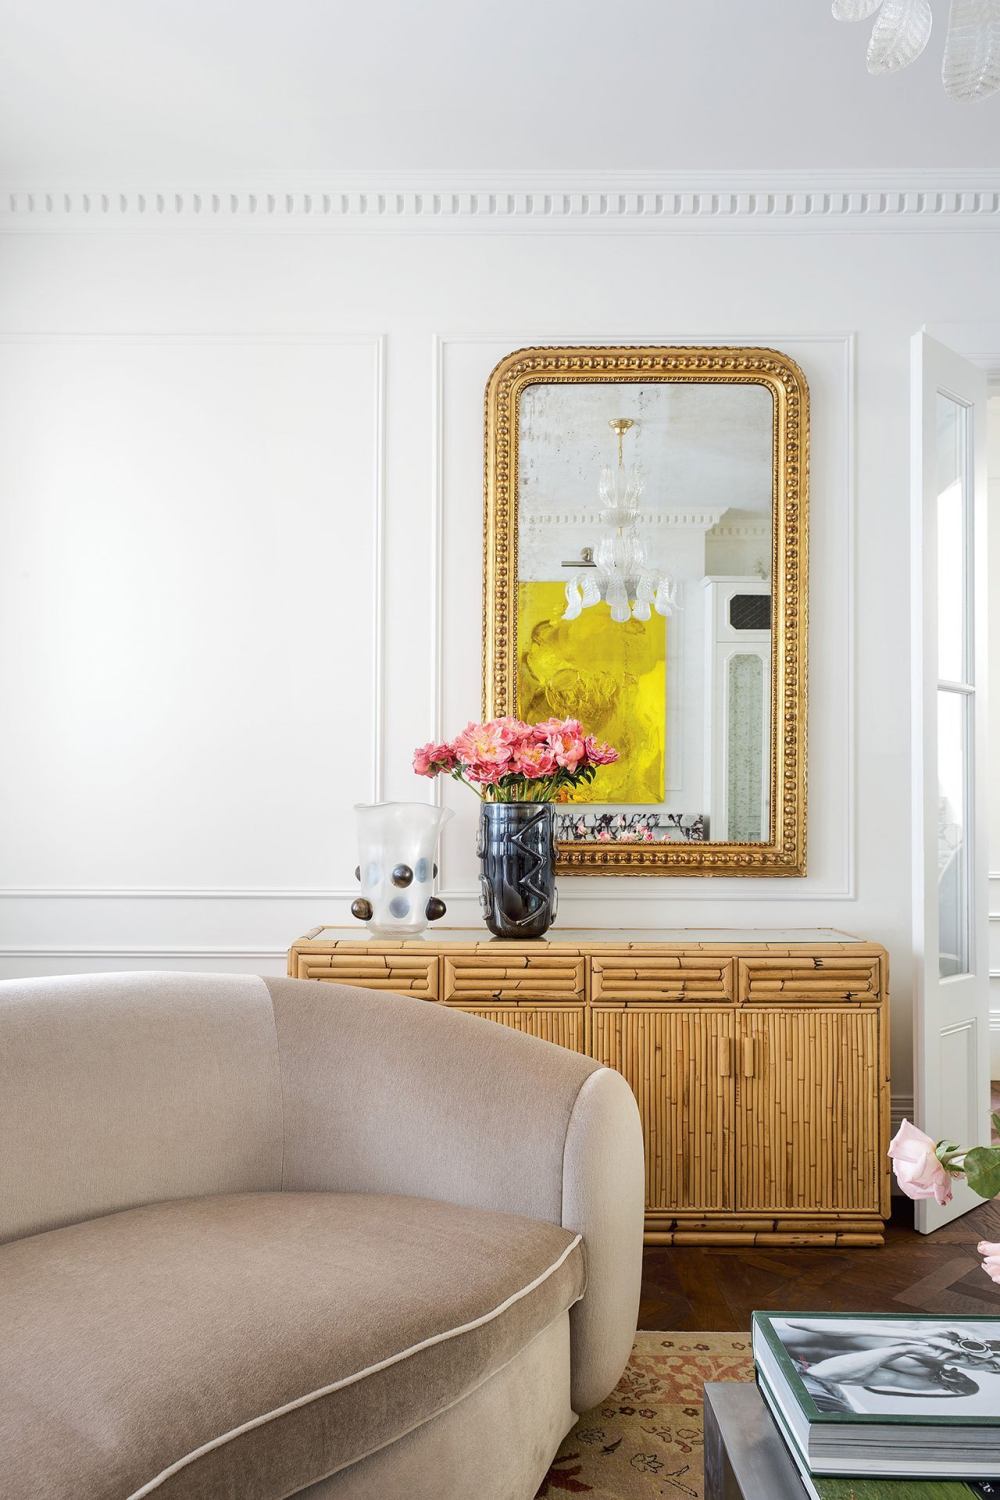 34 chic ways to style mantelpieces, from the world’s most stylish homes-13.jpg